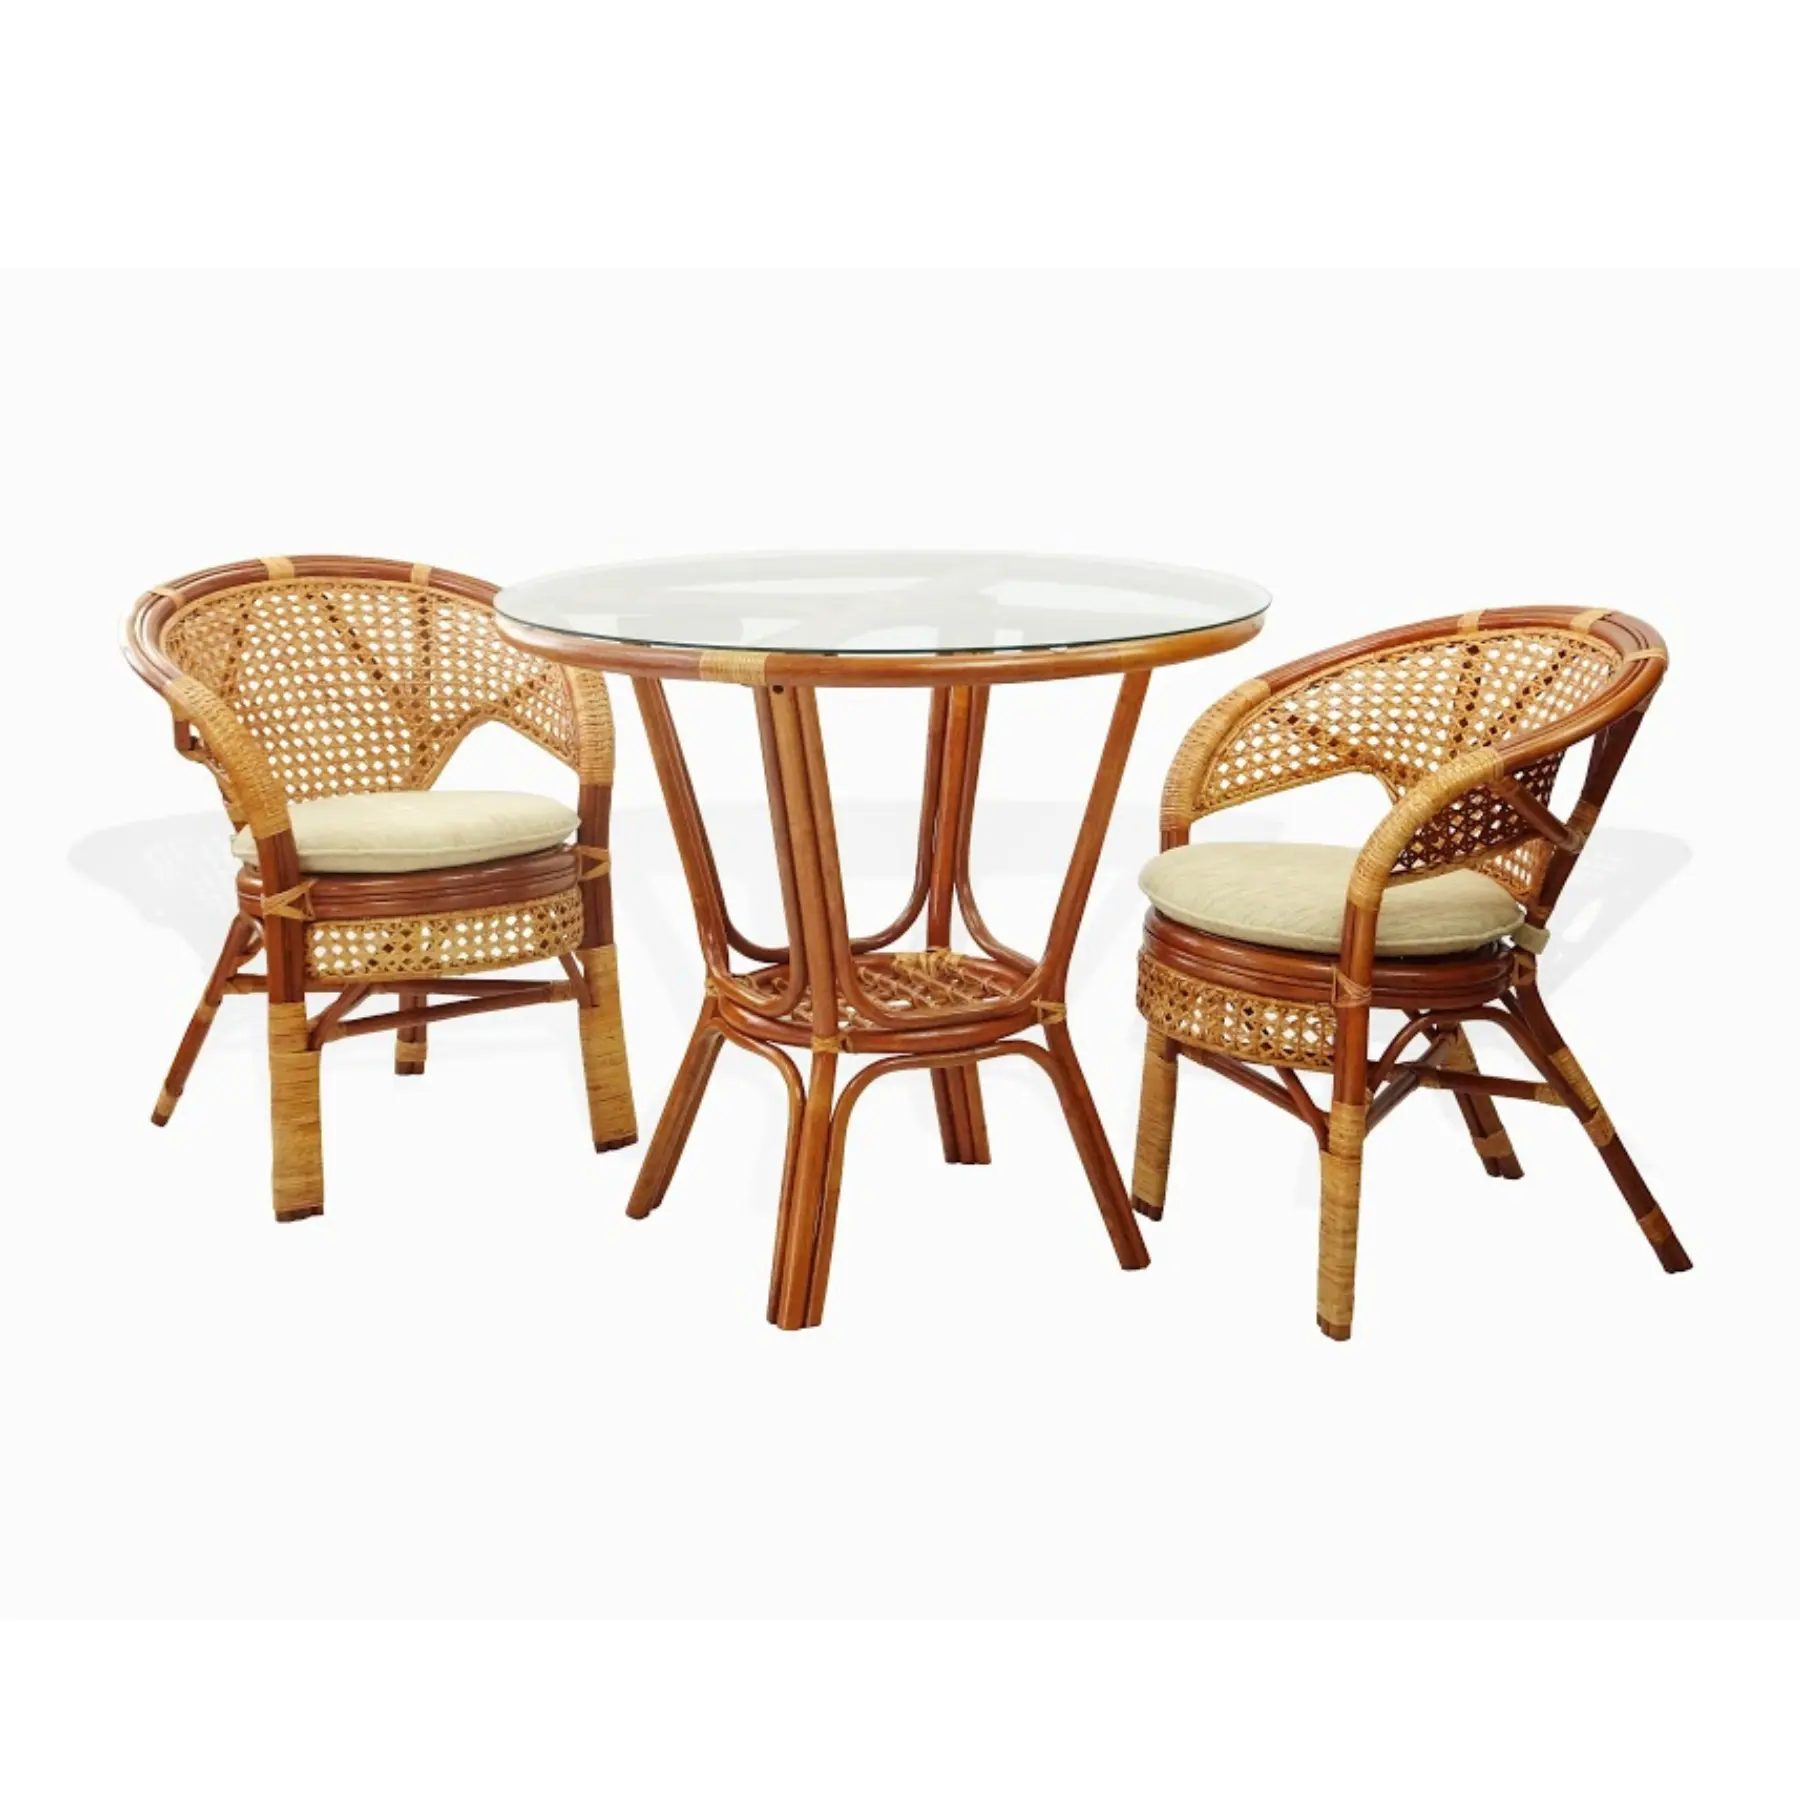 Perfect choice natural rattan woven dining table chairs set luxury outdoor cafe furniture